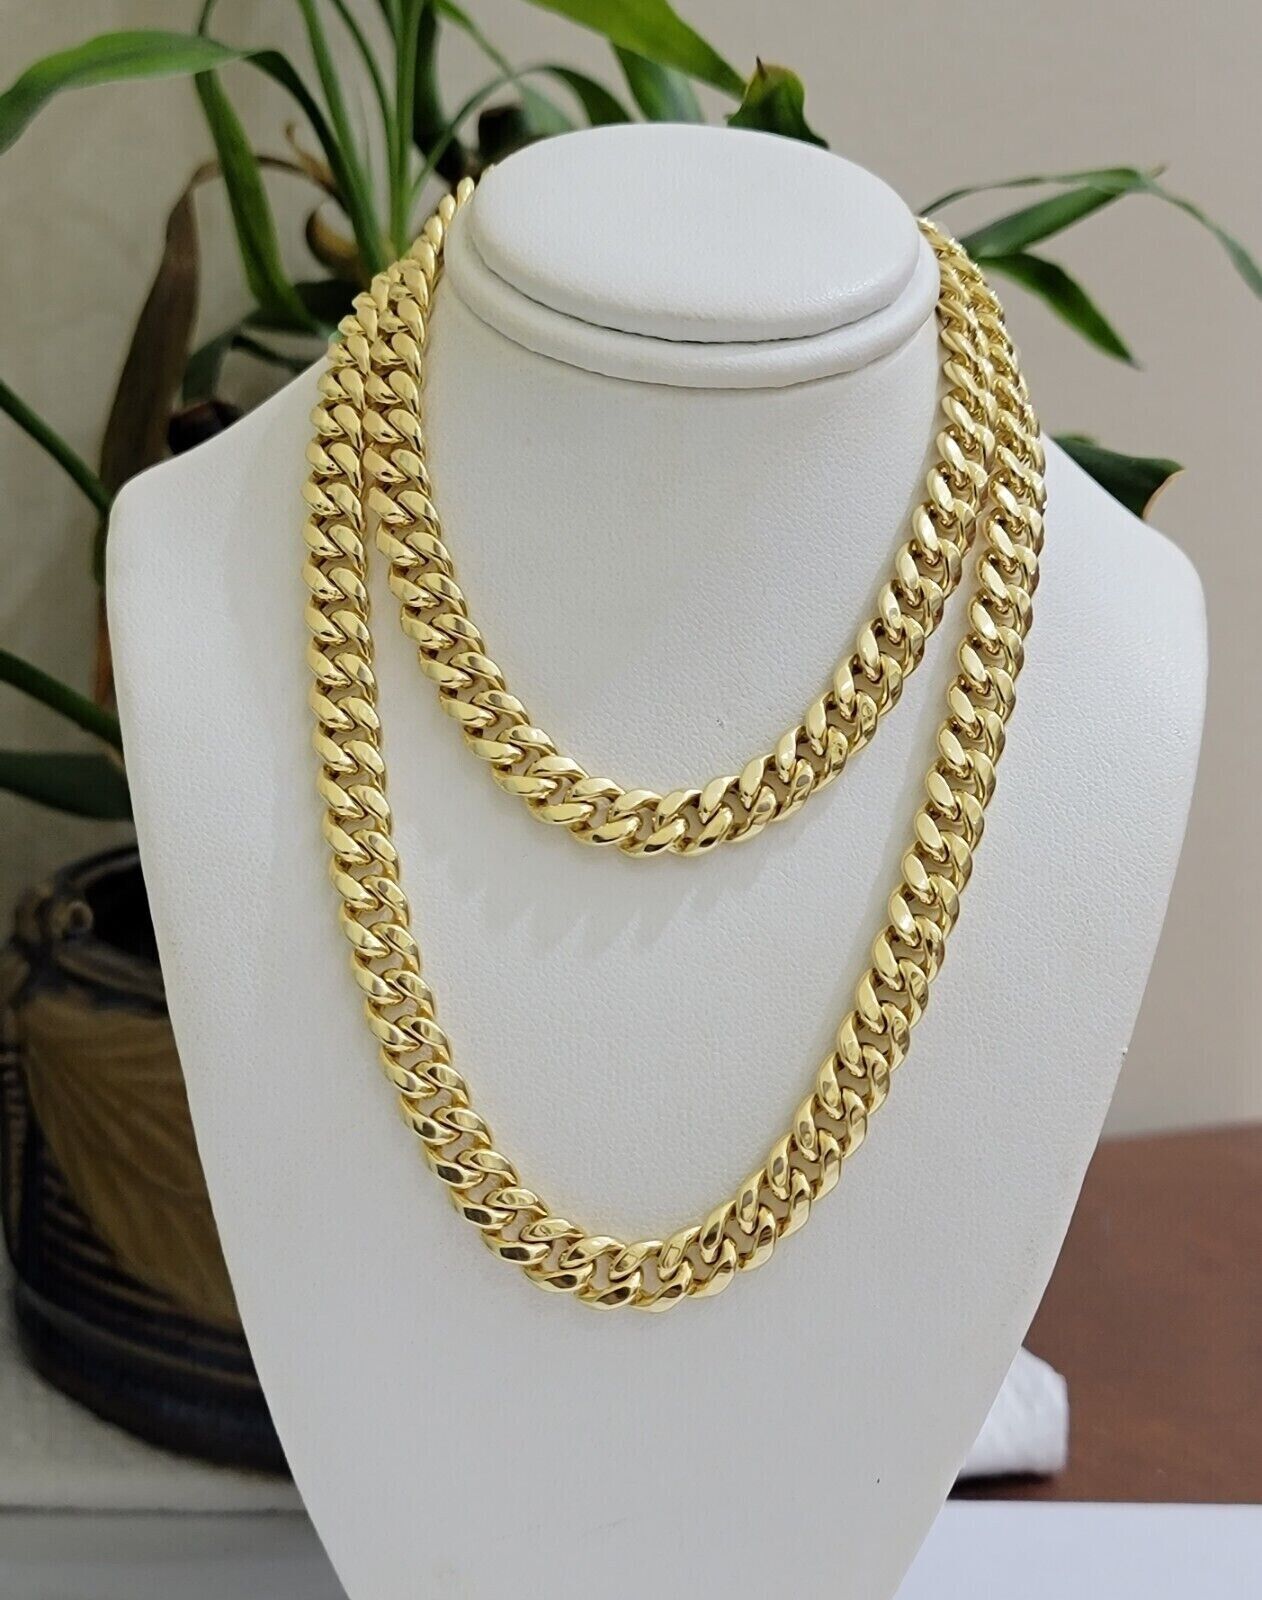 14k Gold Necklace 8mm 18 Inch Miami Cuban Link Chain Link Real 14kt Yellow Gold